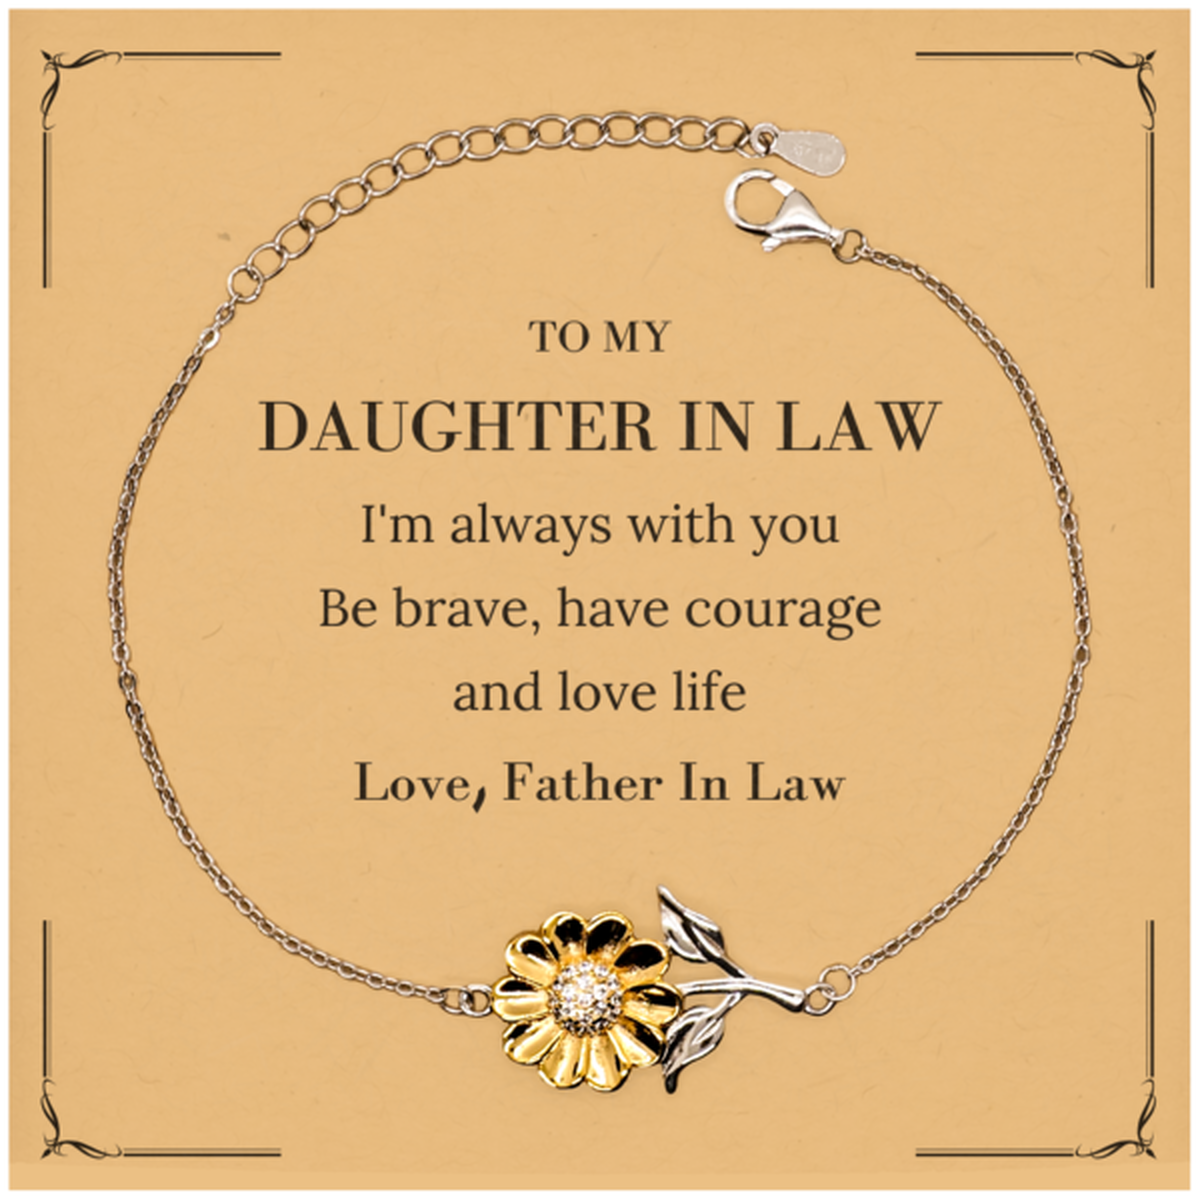 To My Daughter In Law Gifts from Father In Law, Unique Sunflower Bracelet Inspirational Christmas Birthday Graduation Gifts for Daughter In Law I'm always with you. Be brave, have courage and love life. Love, Father In Law